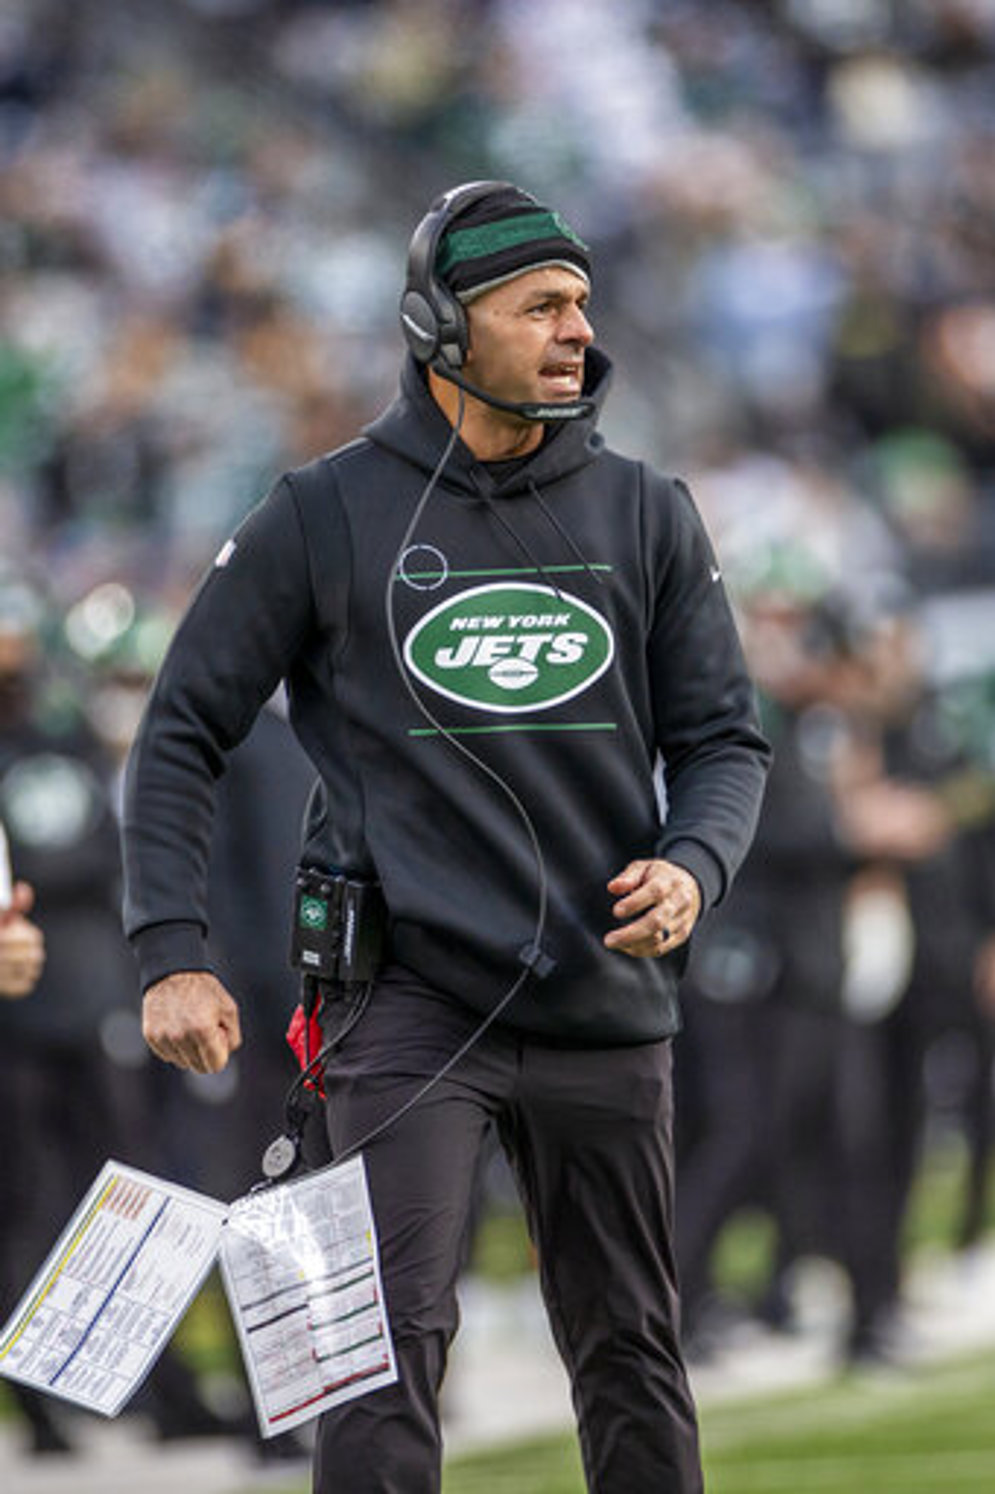 During the 2020 offseason, two out of seven head coaching vacancies were filled by minority candidates (Robert Saleh, New York Jets and David Culley, Houston Texans). Additionally, three out of the seven GM openings were filled by minority candidates (Terry Fontenot, Atlanta Falcons; Brad Holmes, Detroit Lions; Martin Mayhew, Washington Football Team). (AP/Damian Strohmeyer)